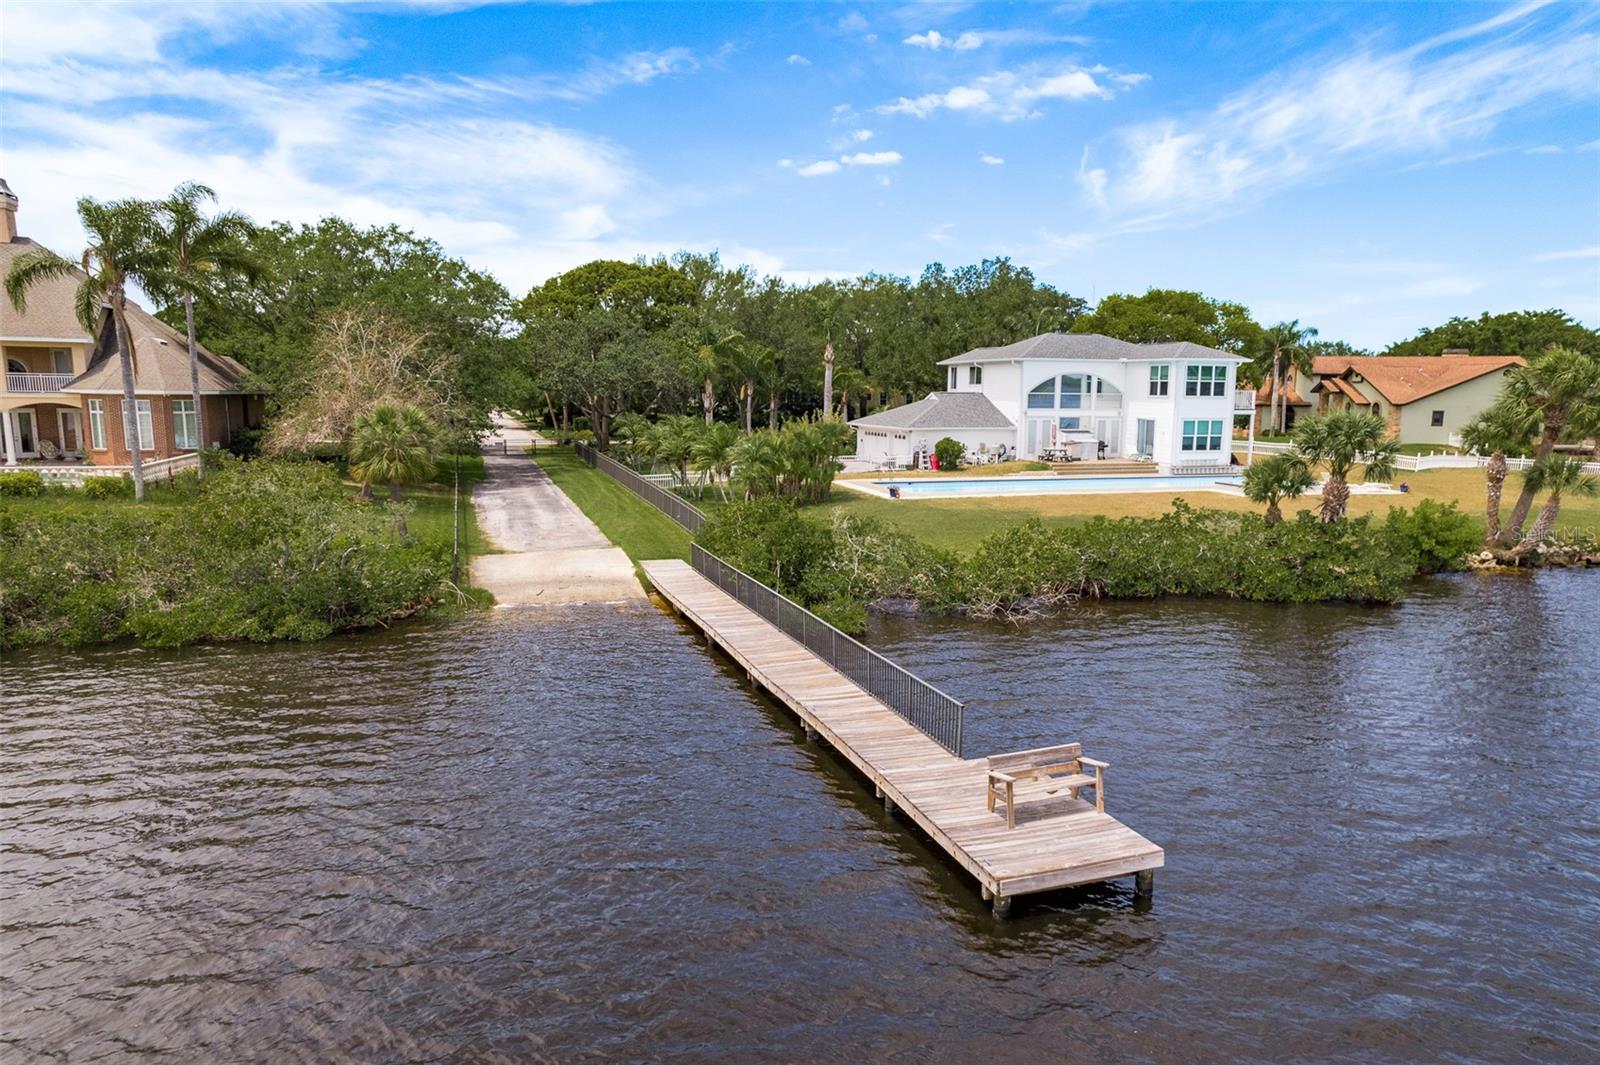 Enjoy the convenience of gulf access, offering endless opportunities for boating, fishing, and water recreation right from your own backyard, allowing you to explore and experience the beauty of the waterways with ease and convenience.